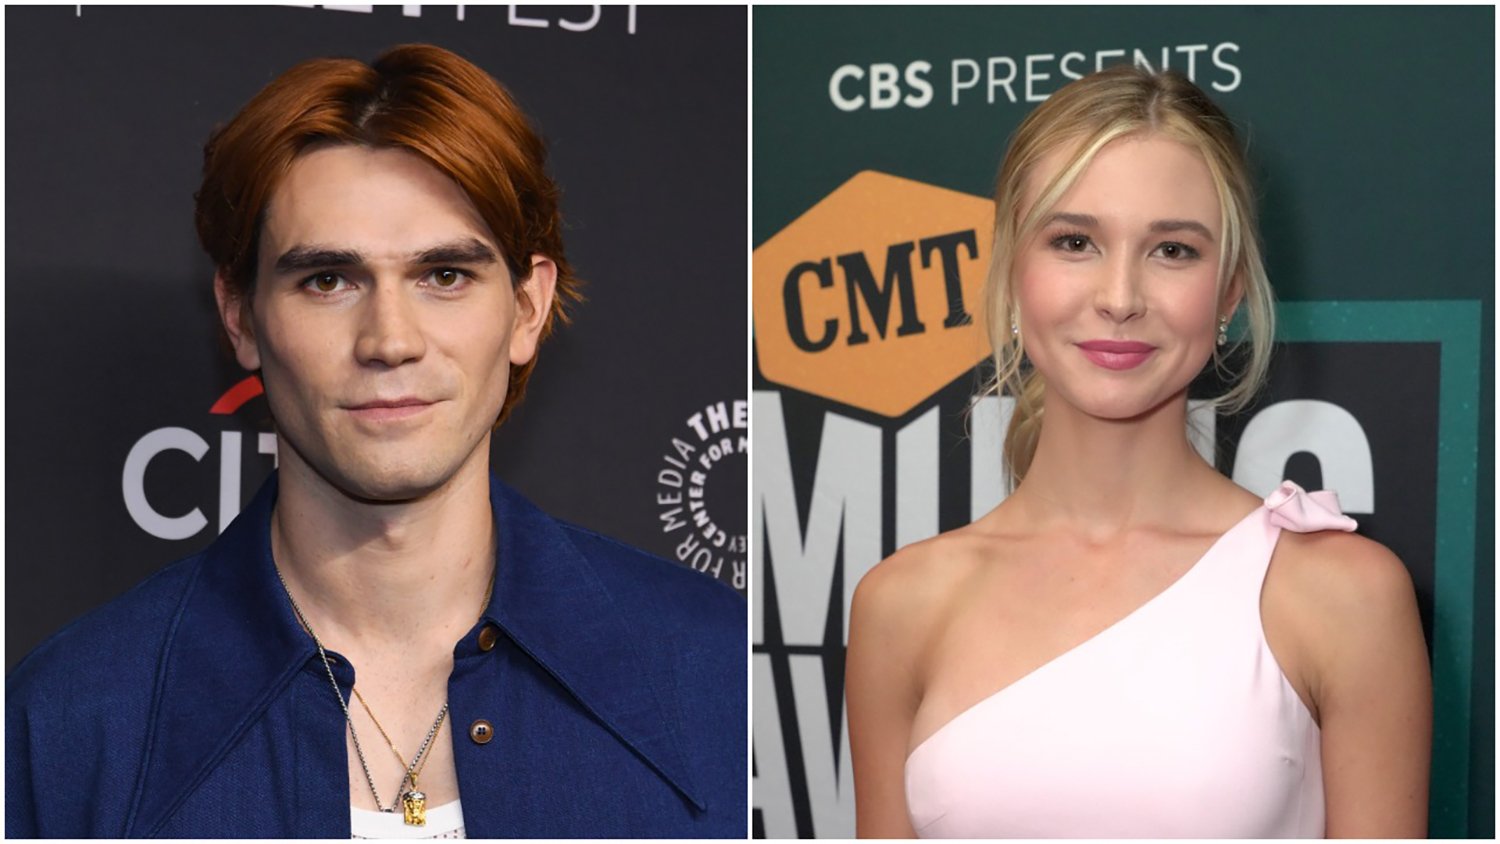 The stars of HBO Max's canceled Wonder Twins film: KJ Apa attends PaleyFest LA 2022 // Isabel May attends 2022 CMT Awards.